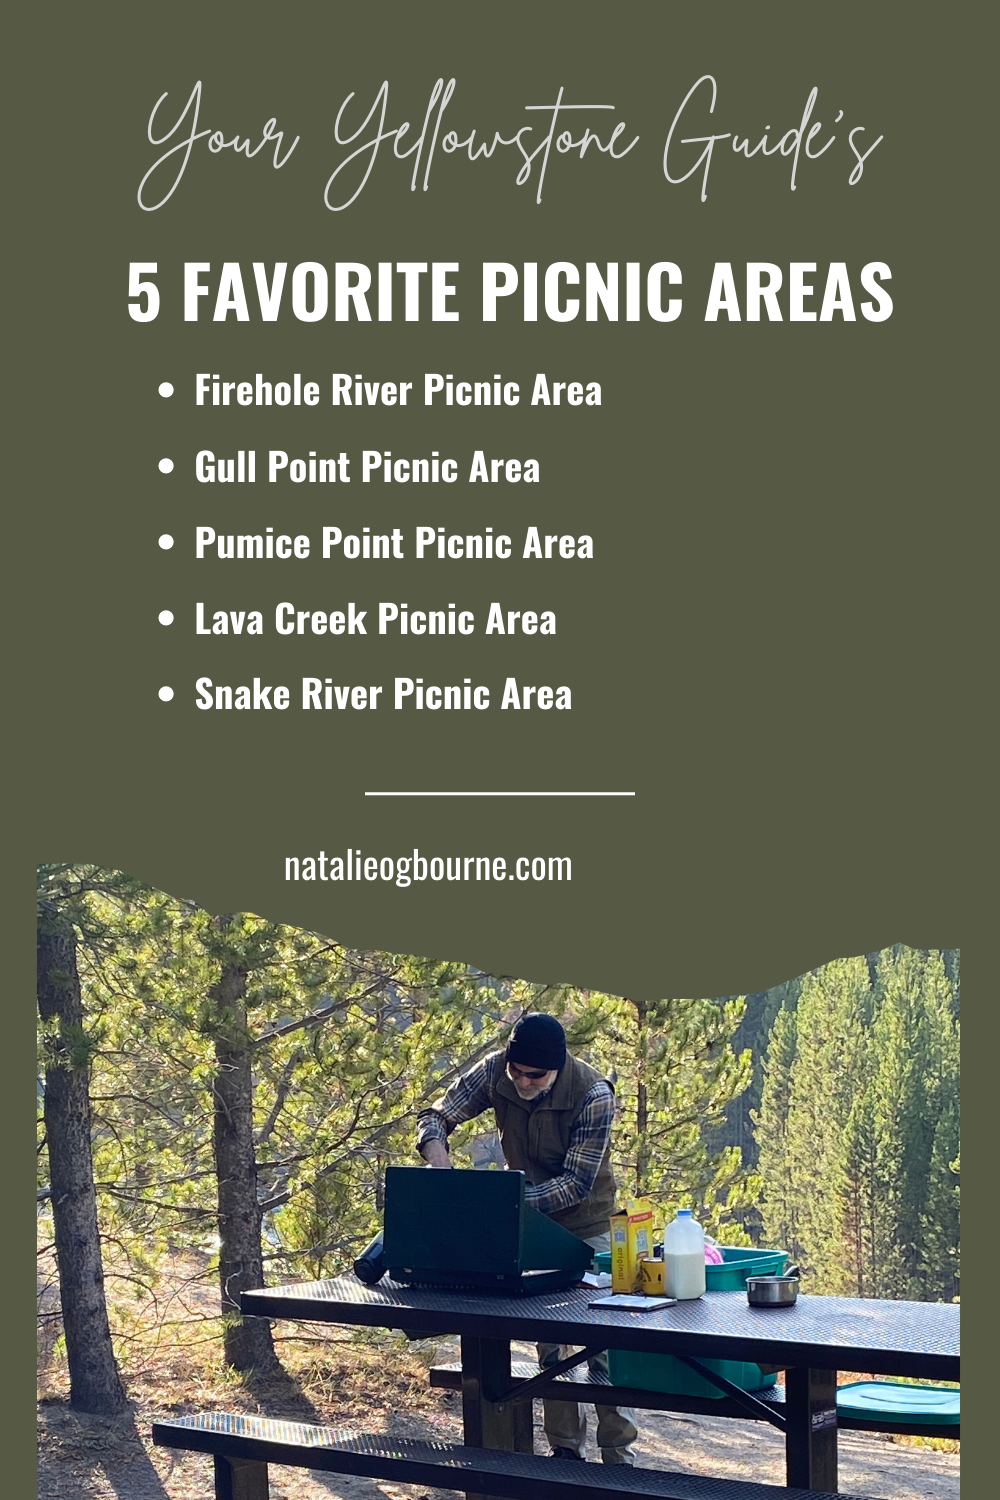 Your Yellowstone Guide's 5 Favorite Picnic Areas